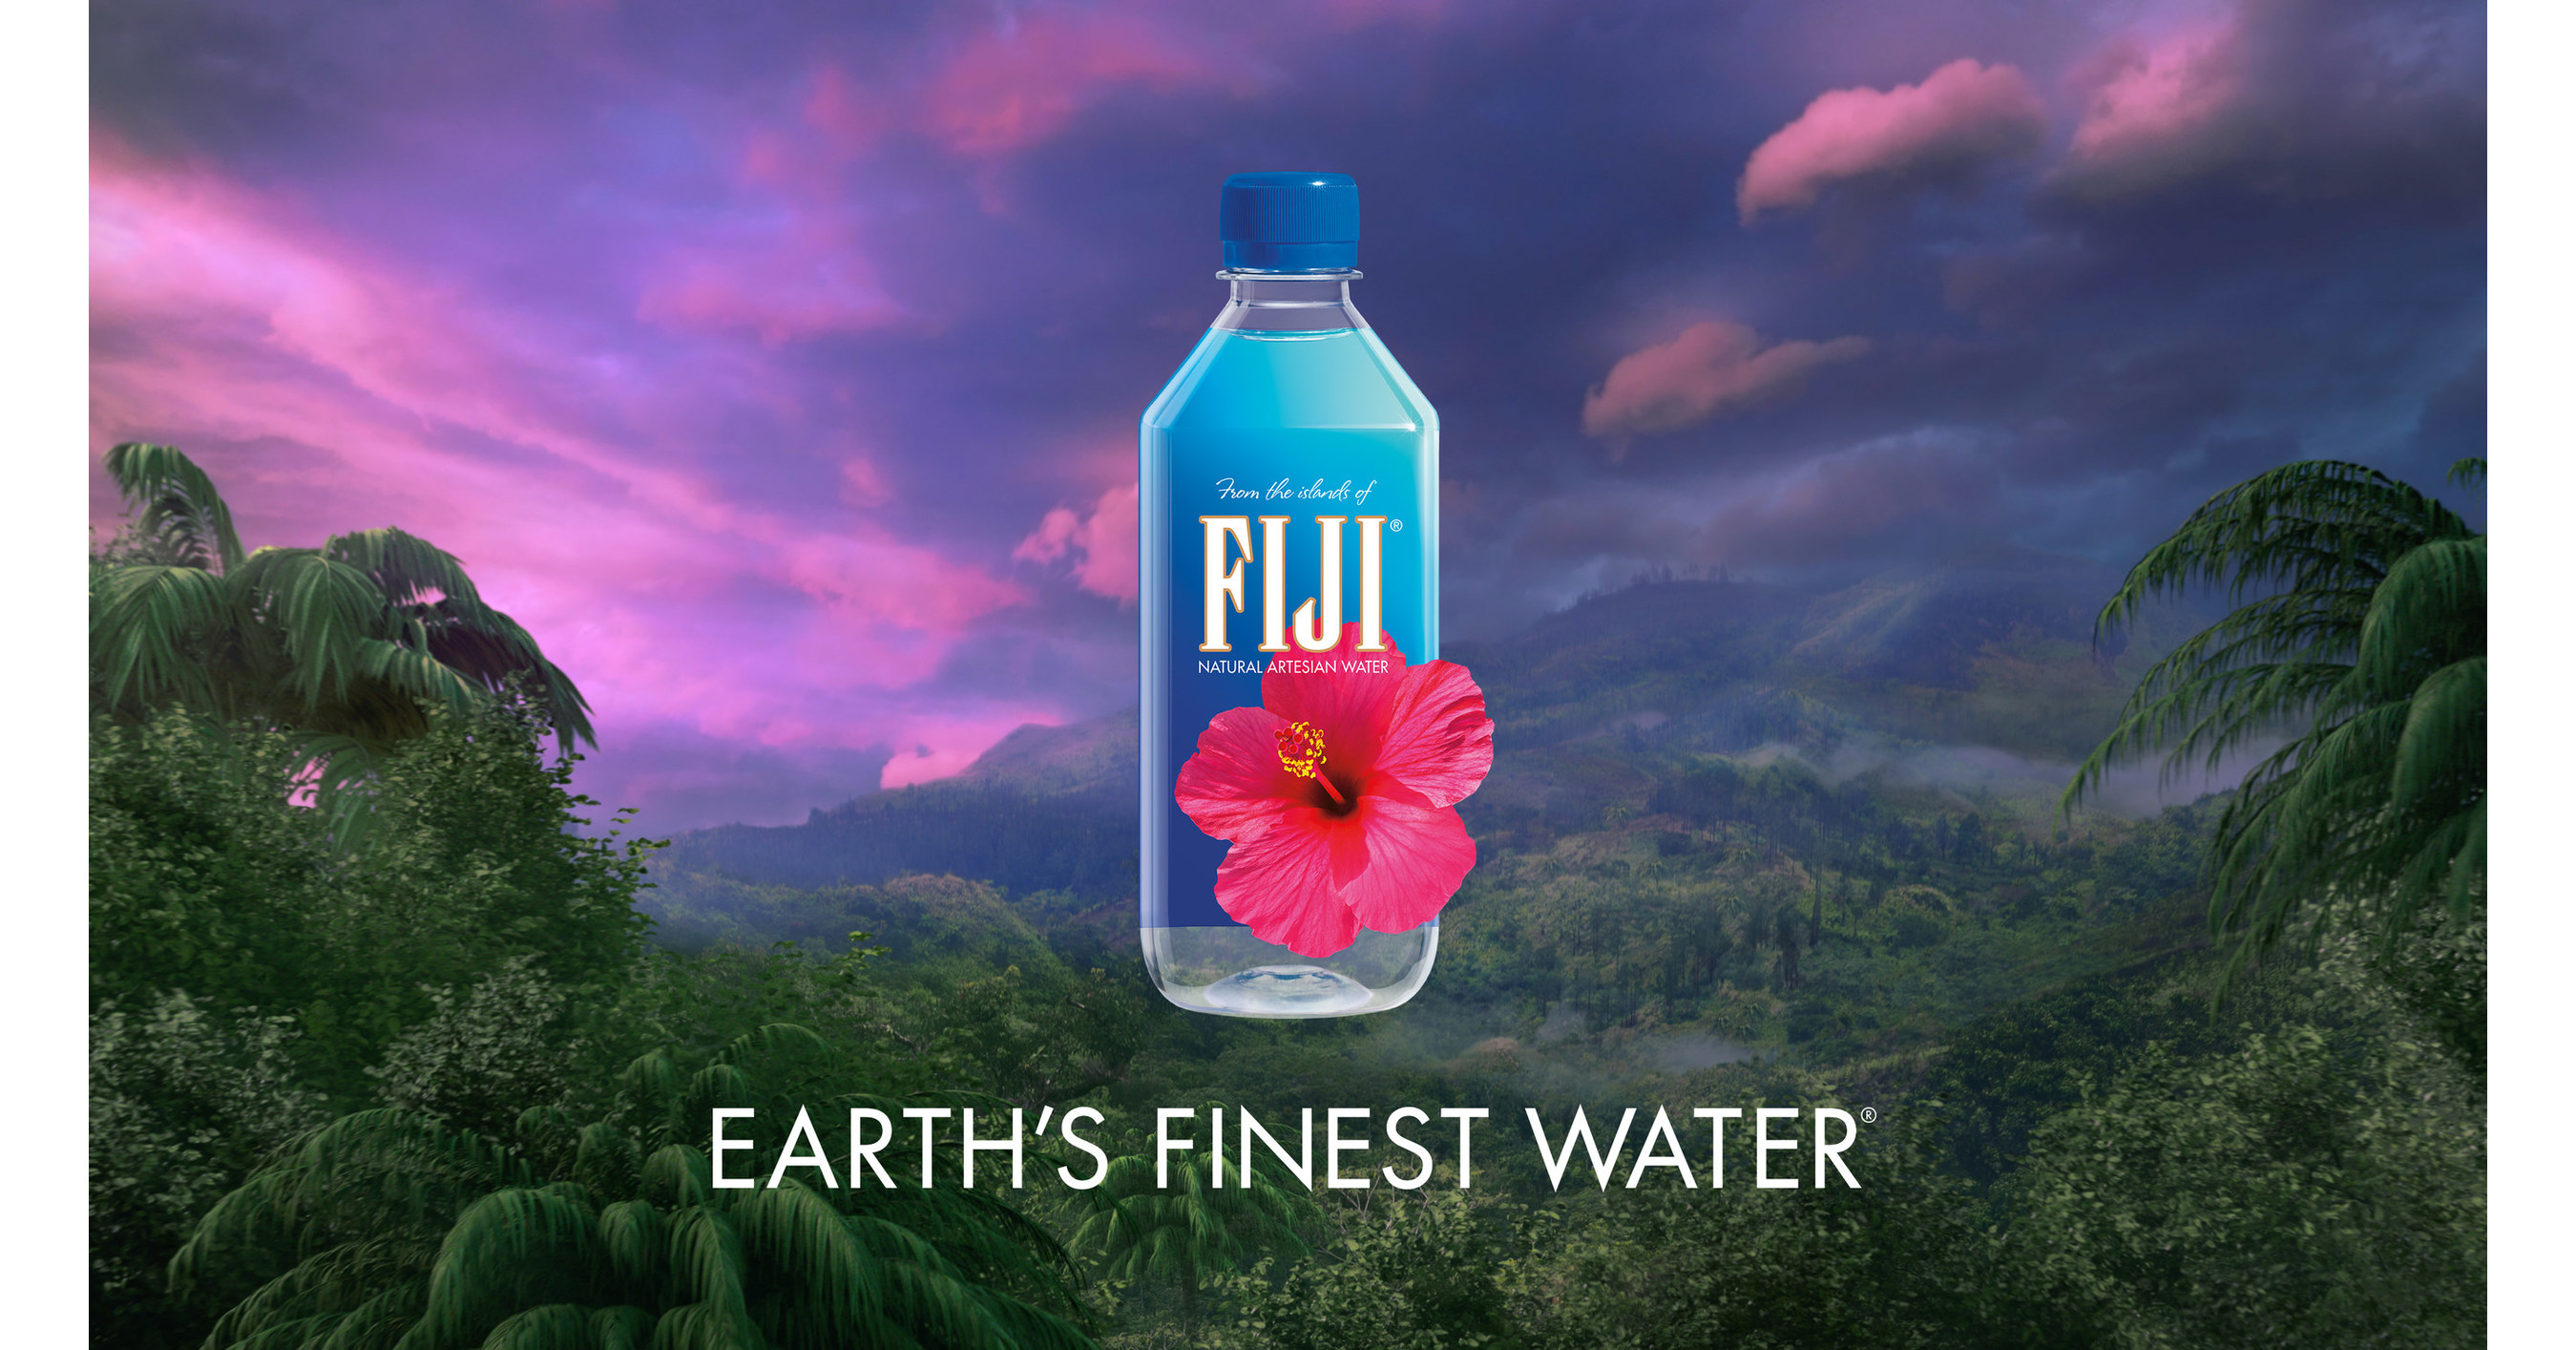 FIJI Water Creates a Perfect Storm to Highlight Its Pristine Source in